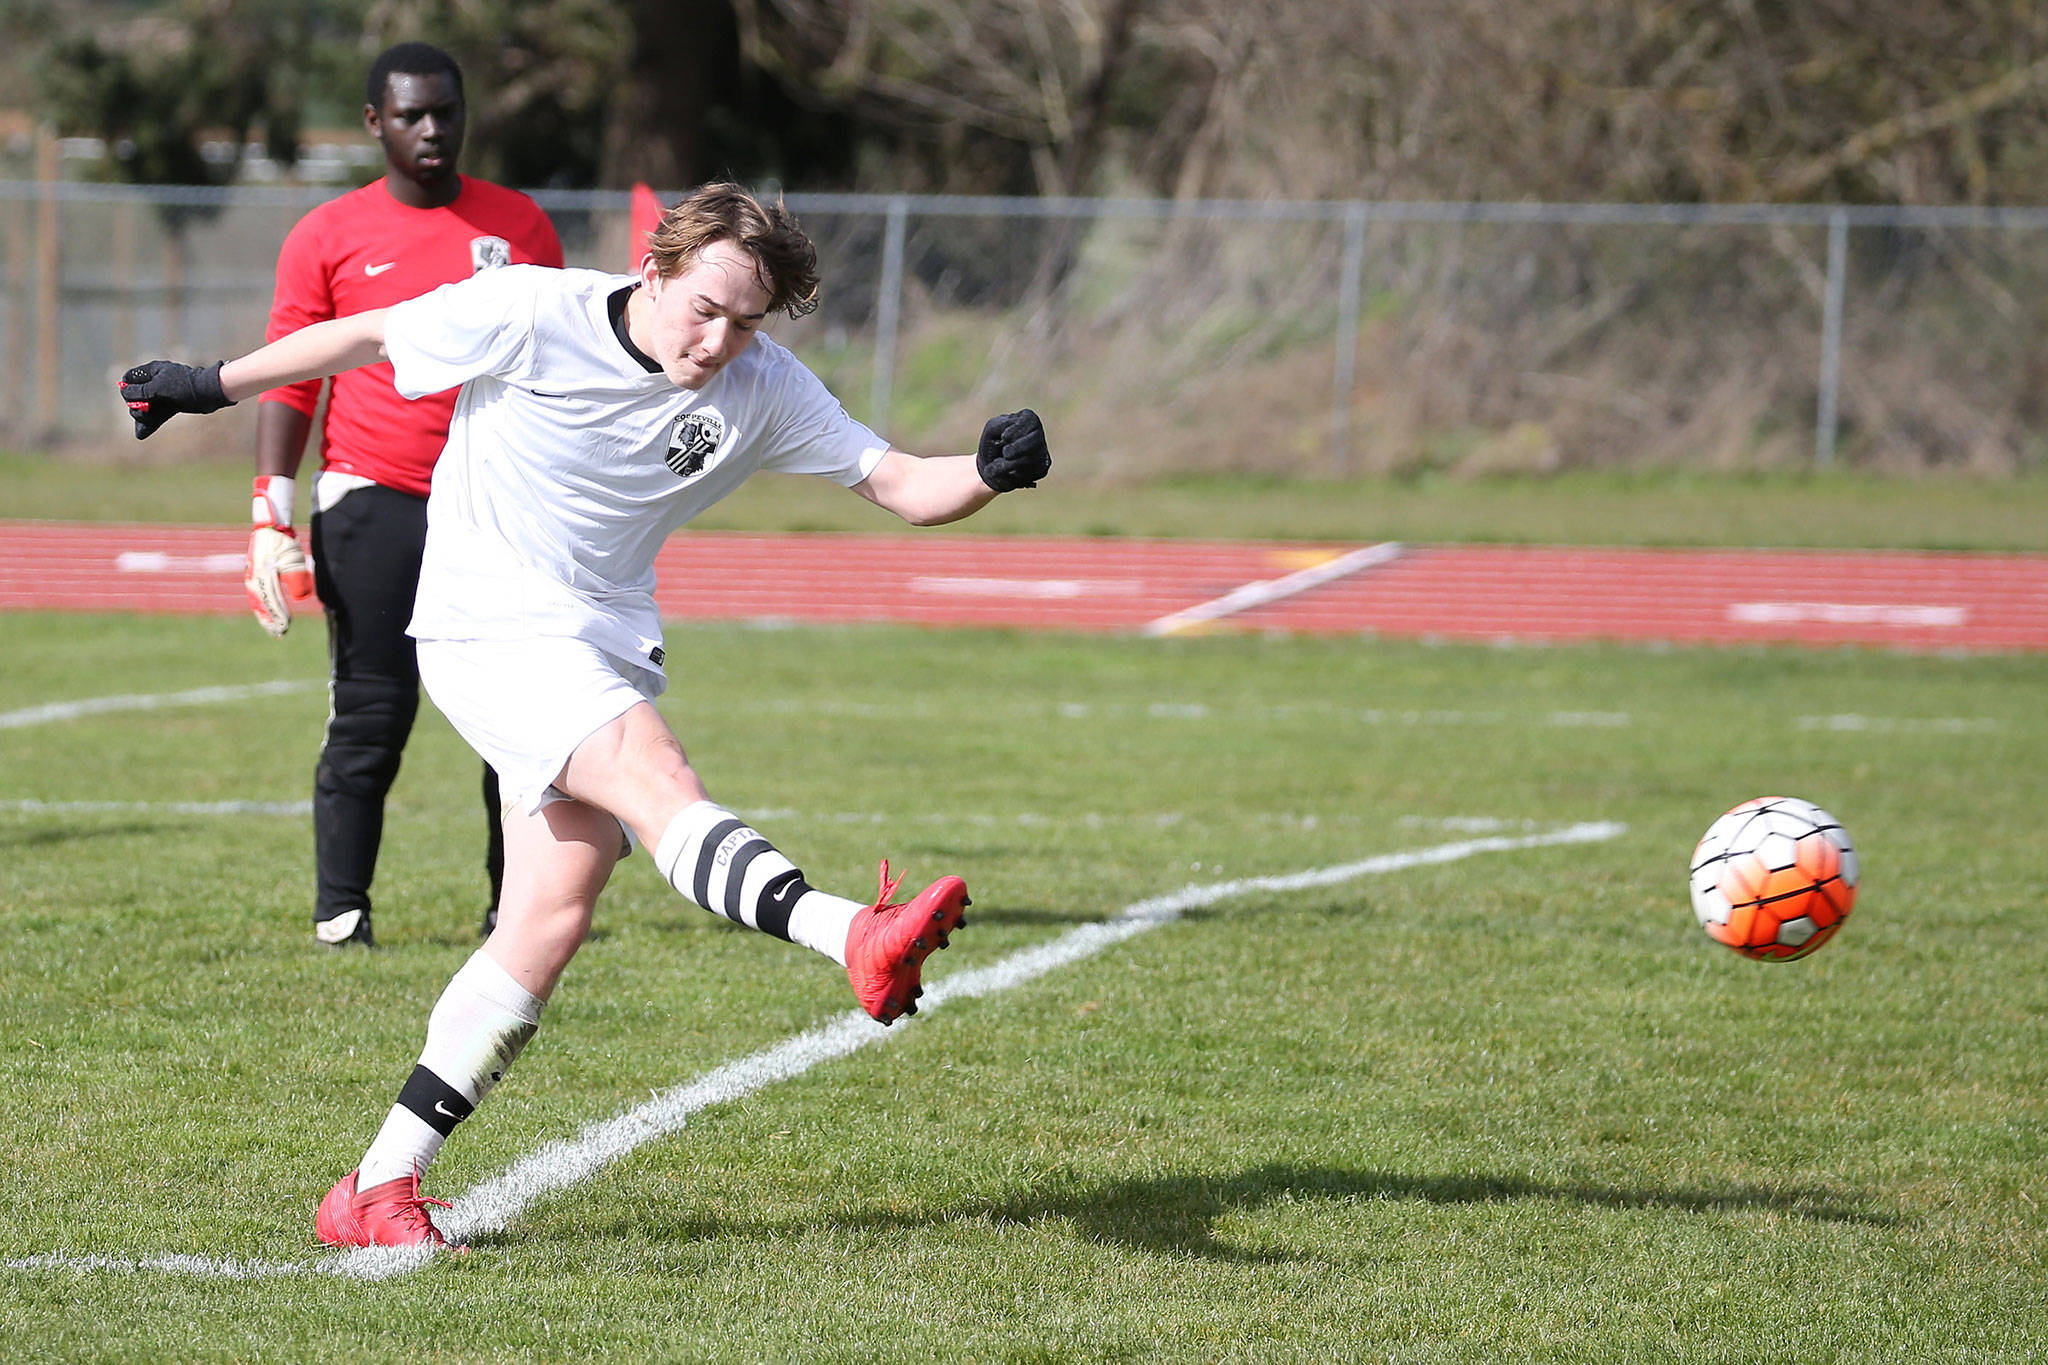 Ethan Spark puts the ball in play in Coupeville’s contest with Klahowya Saturday.(Photo by John Fisken)